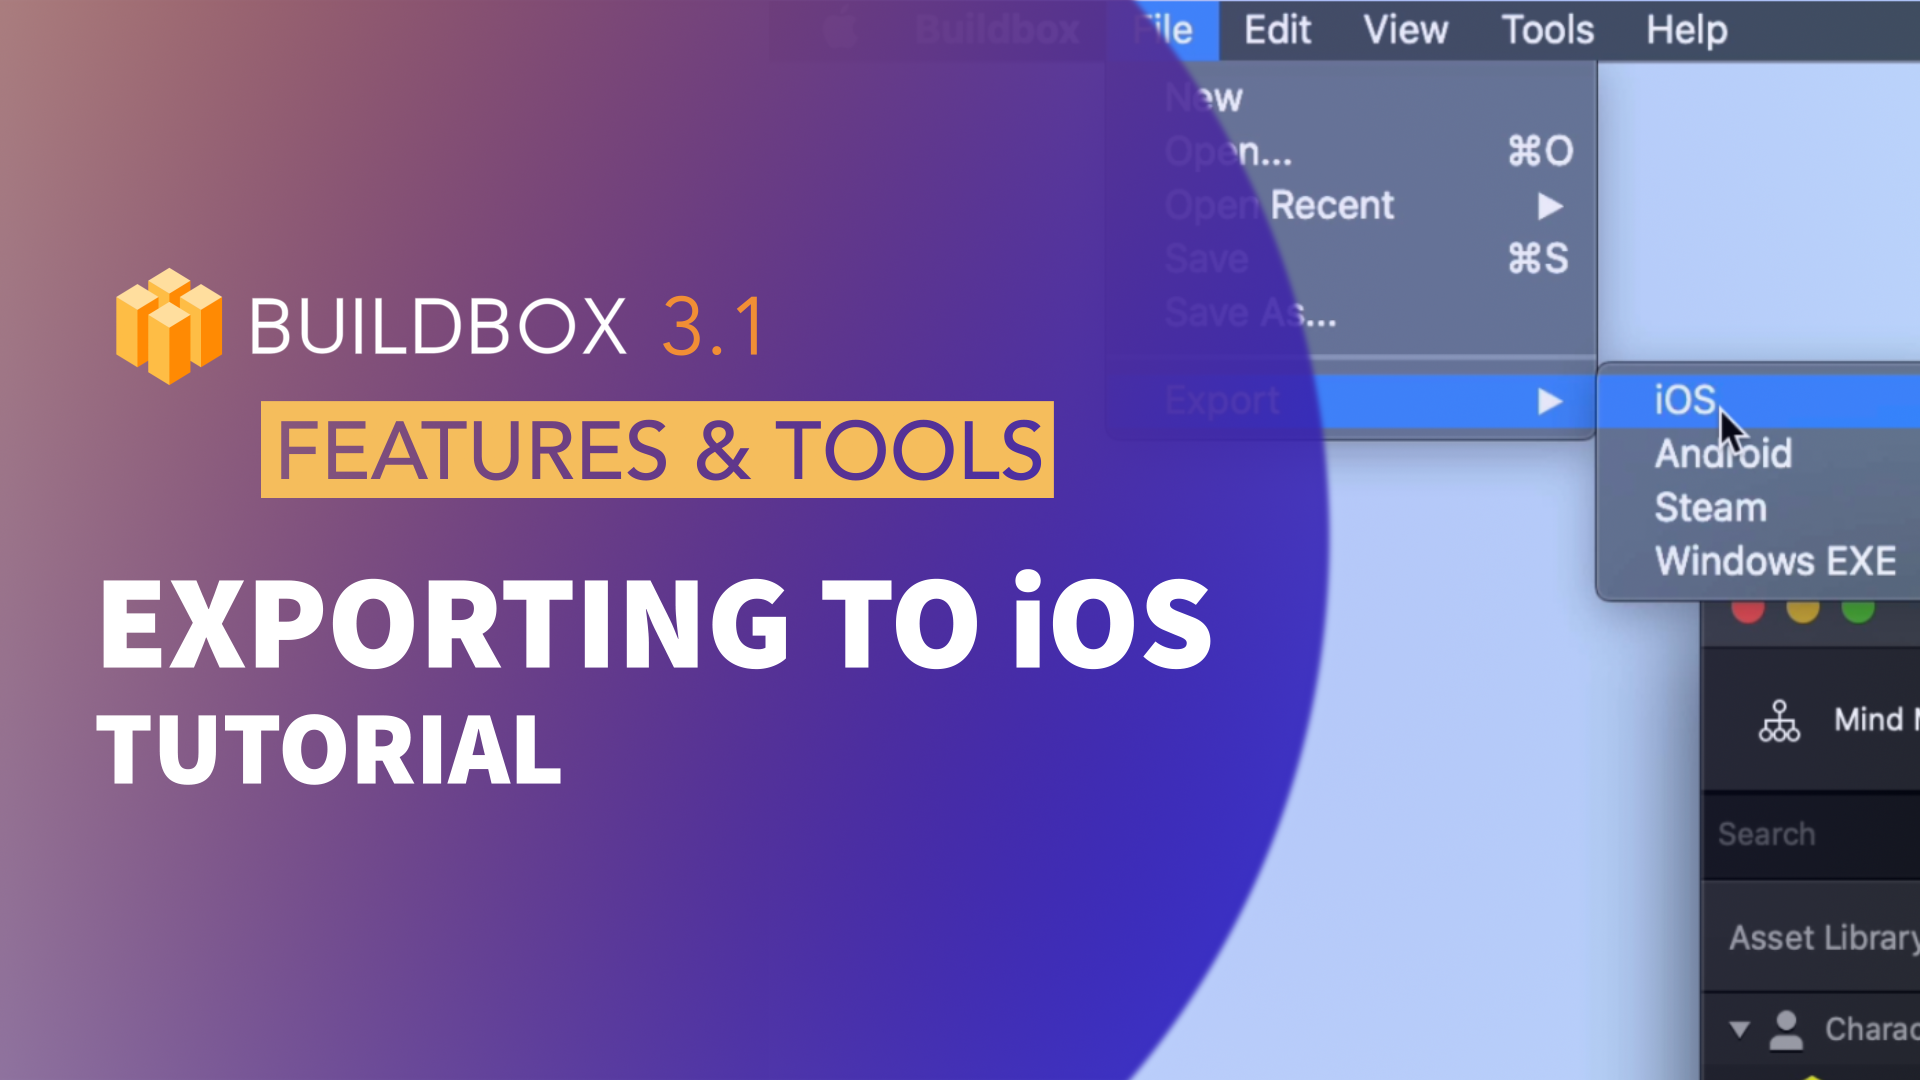 Exporting to iOS